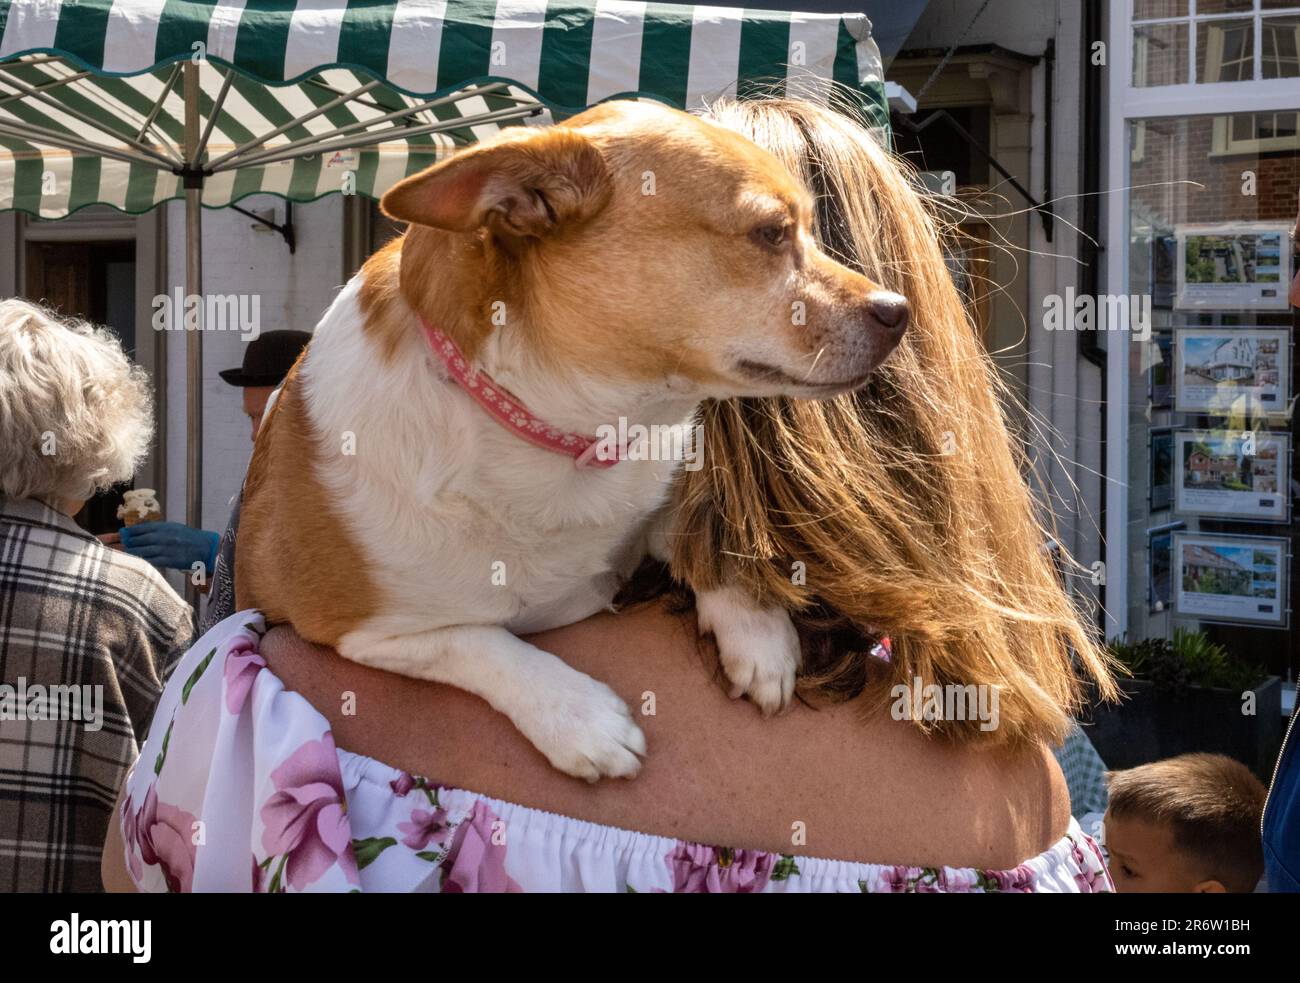 A woman carries her pet dog on her shoulder at Steyning Country Fayre, West Sussex, UK. Stock Photo